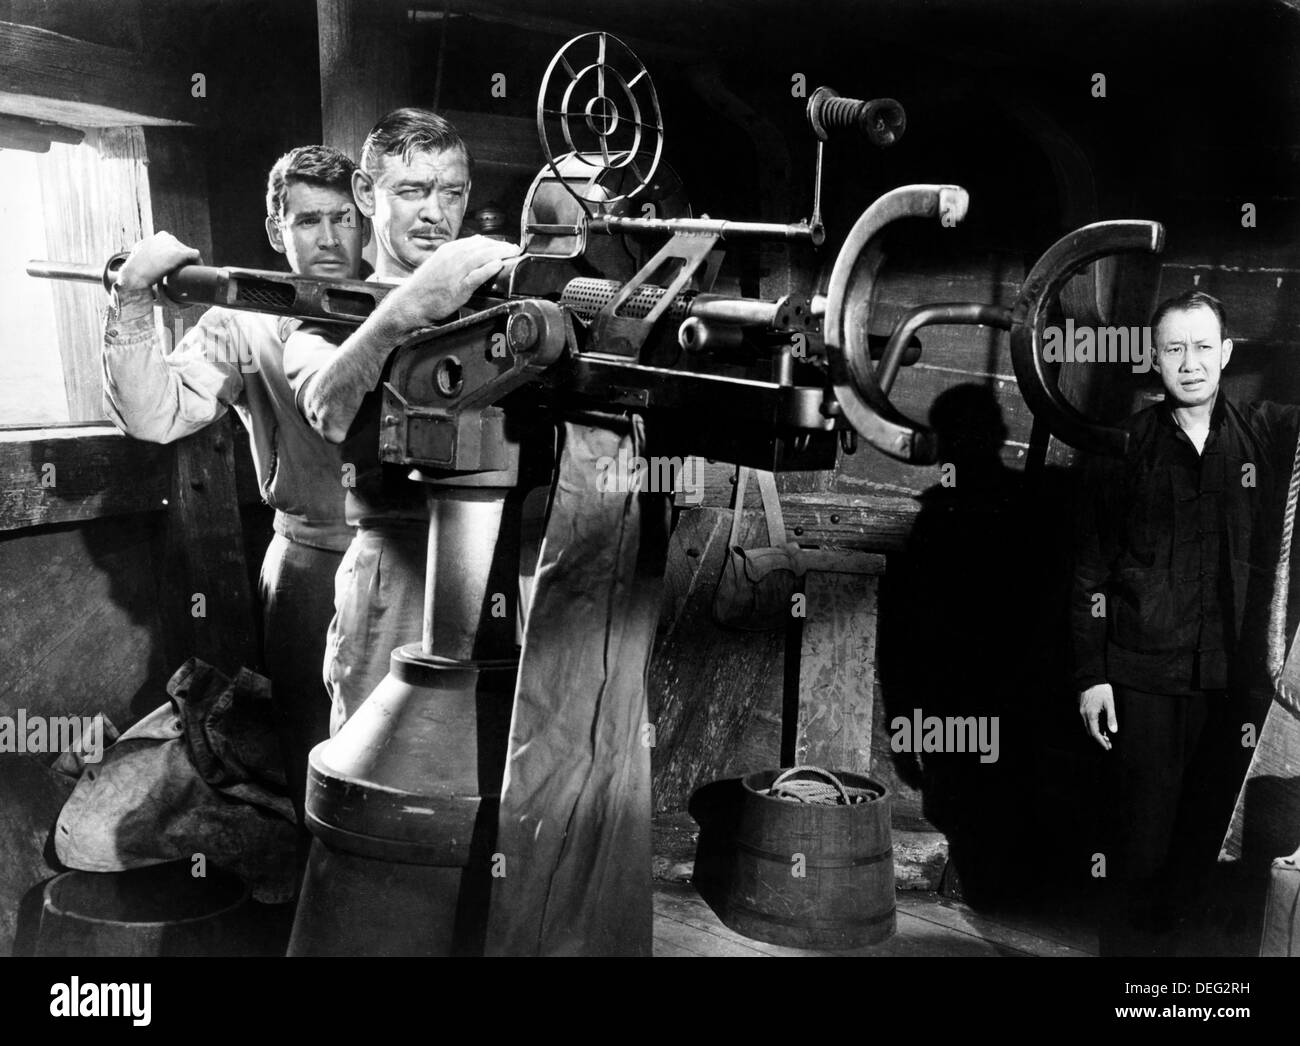 SOLDIER OF FORTUNE (1955) GENE BARRY, CLARK GABLE, EDWARD DMYTRYK (DIR) SOLD 001 MOVIESTORE COLLECTION LTD Stock Photo